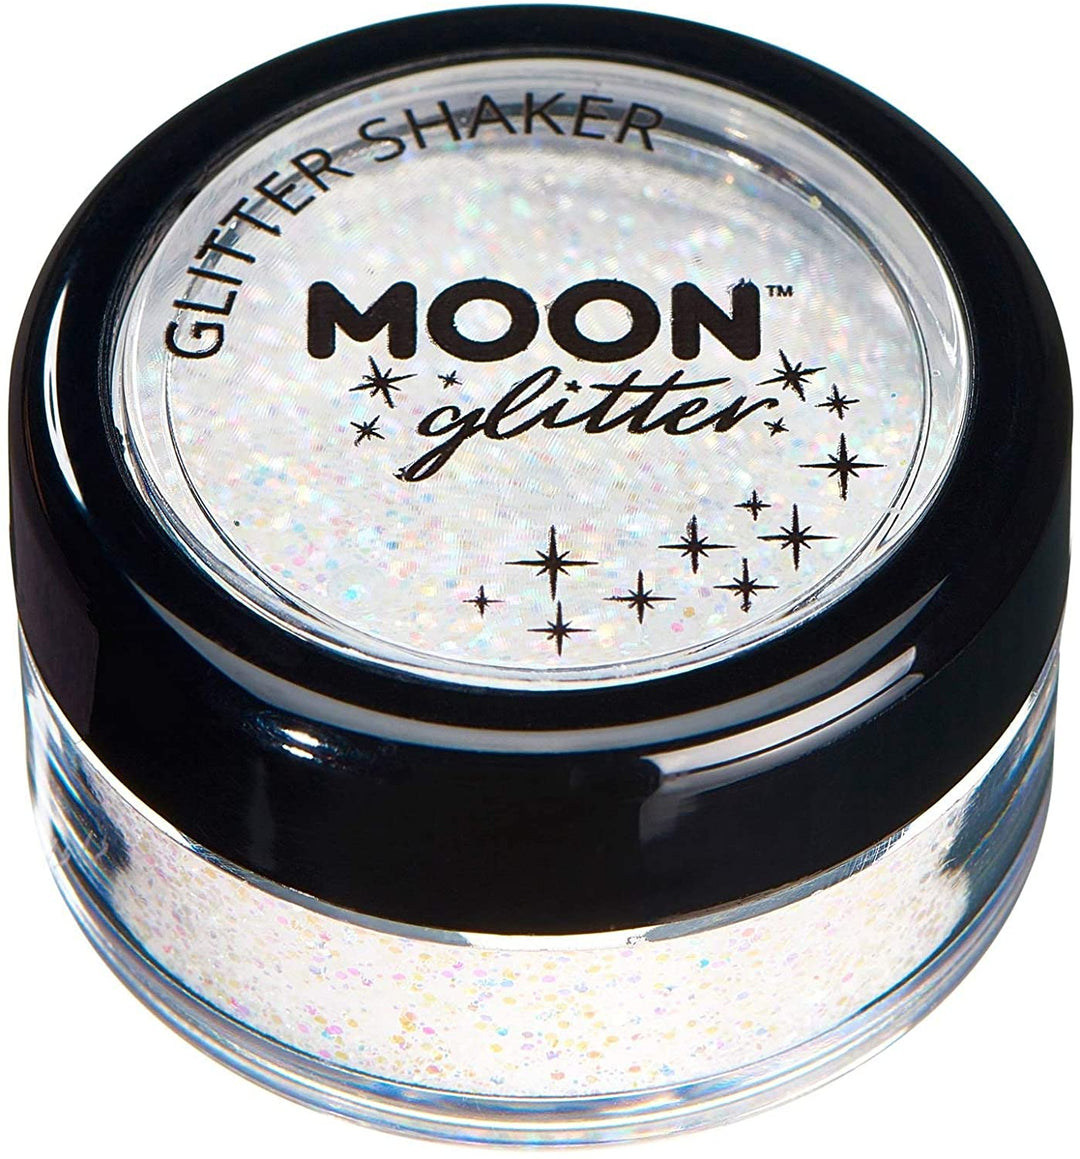 Pastel Glitter Shakers by Moon Glitter - White - Cosmetic Festival Makeup Glitter for Face, Body, Nails, Hair, Lips - 5g